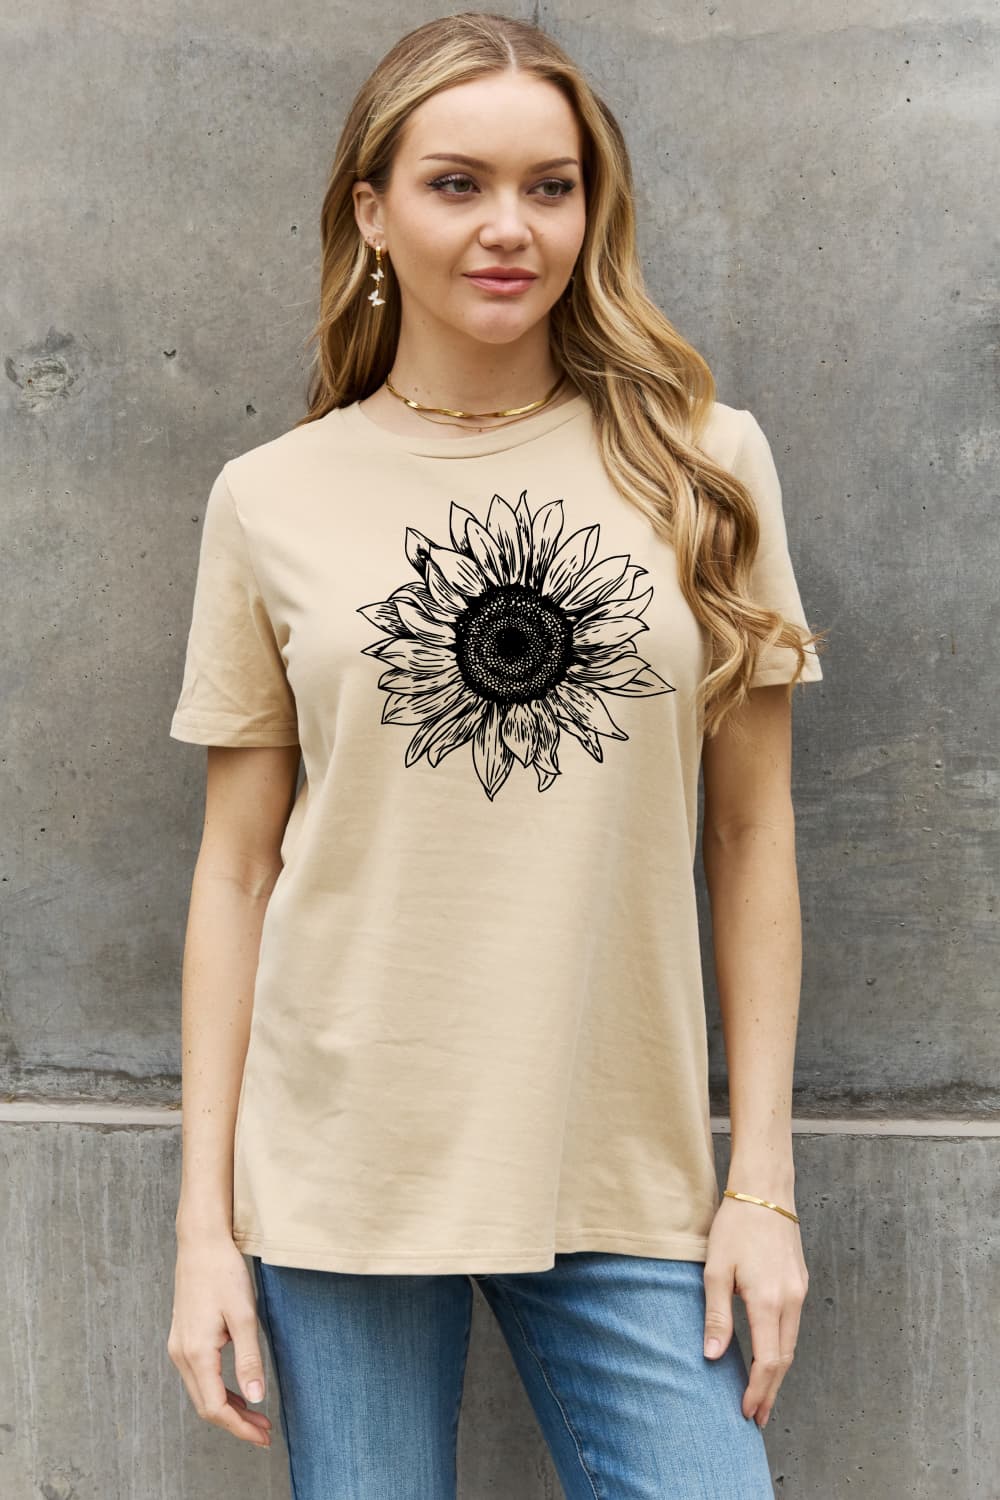 Full Size Sunflower Graphic Cotton Tee - Beige / S - T-Shirts - Shirts & Tops - 1 - 2024